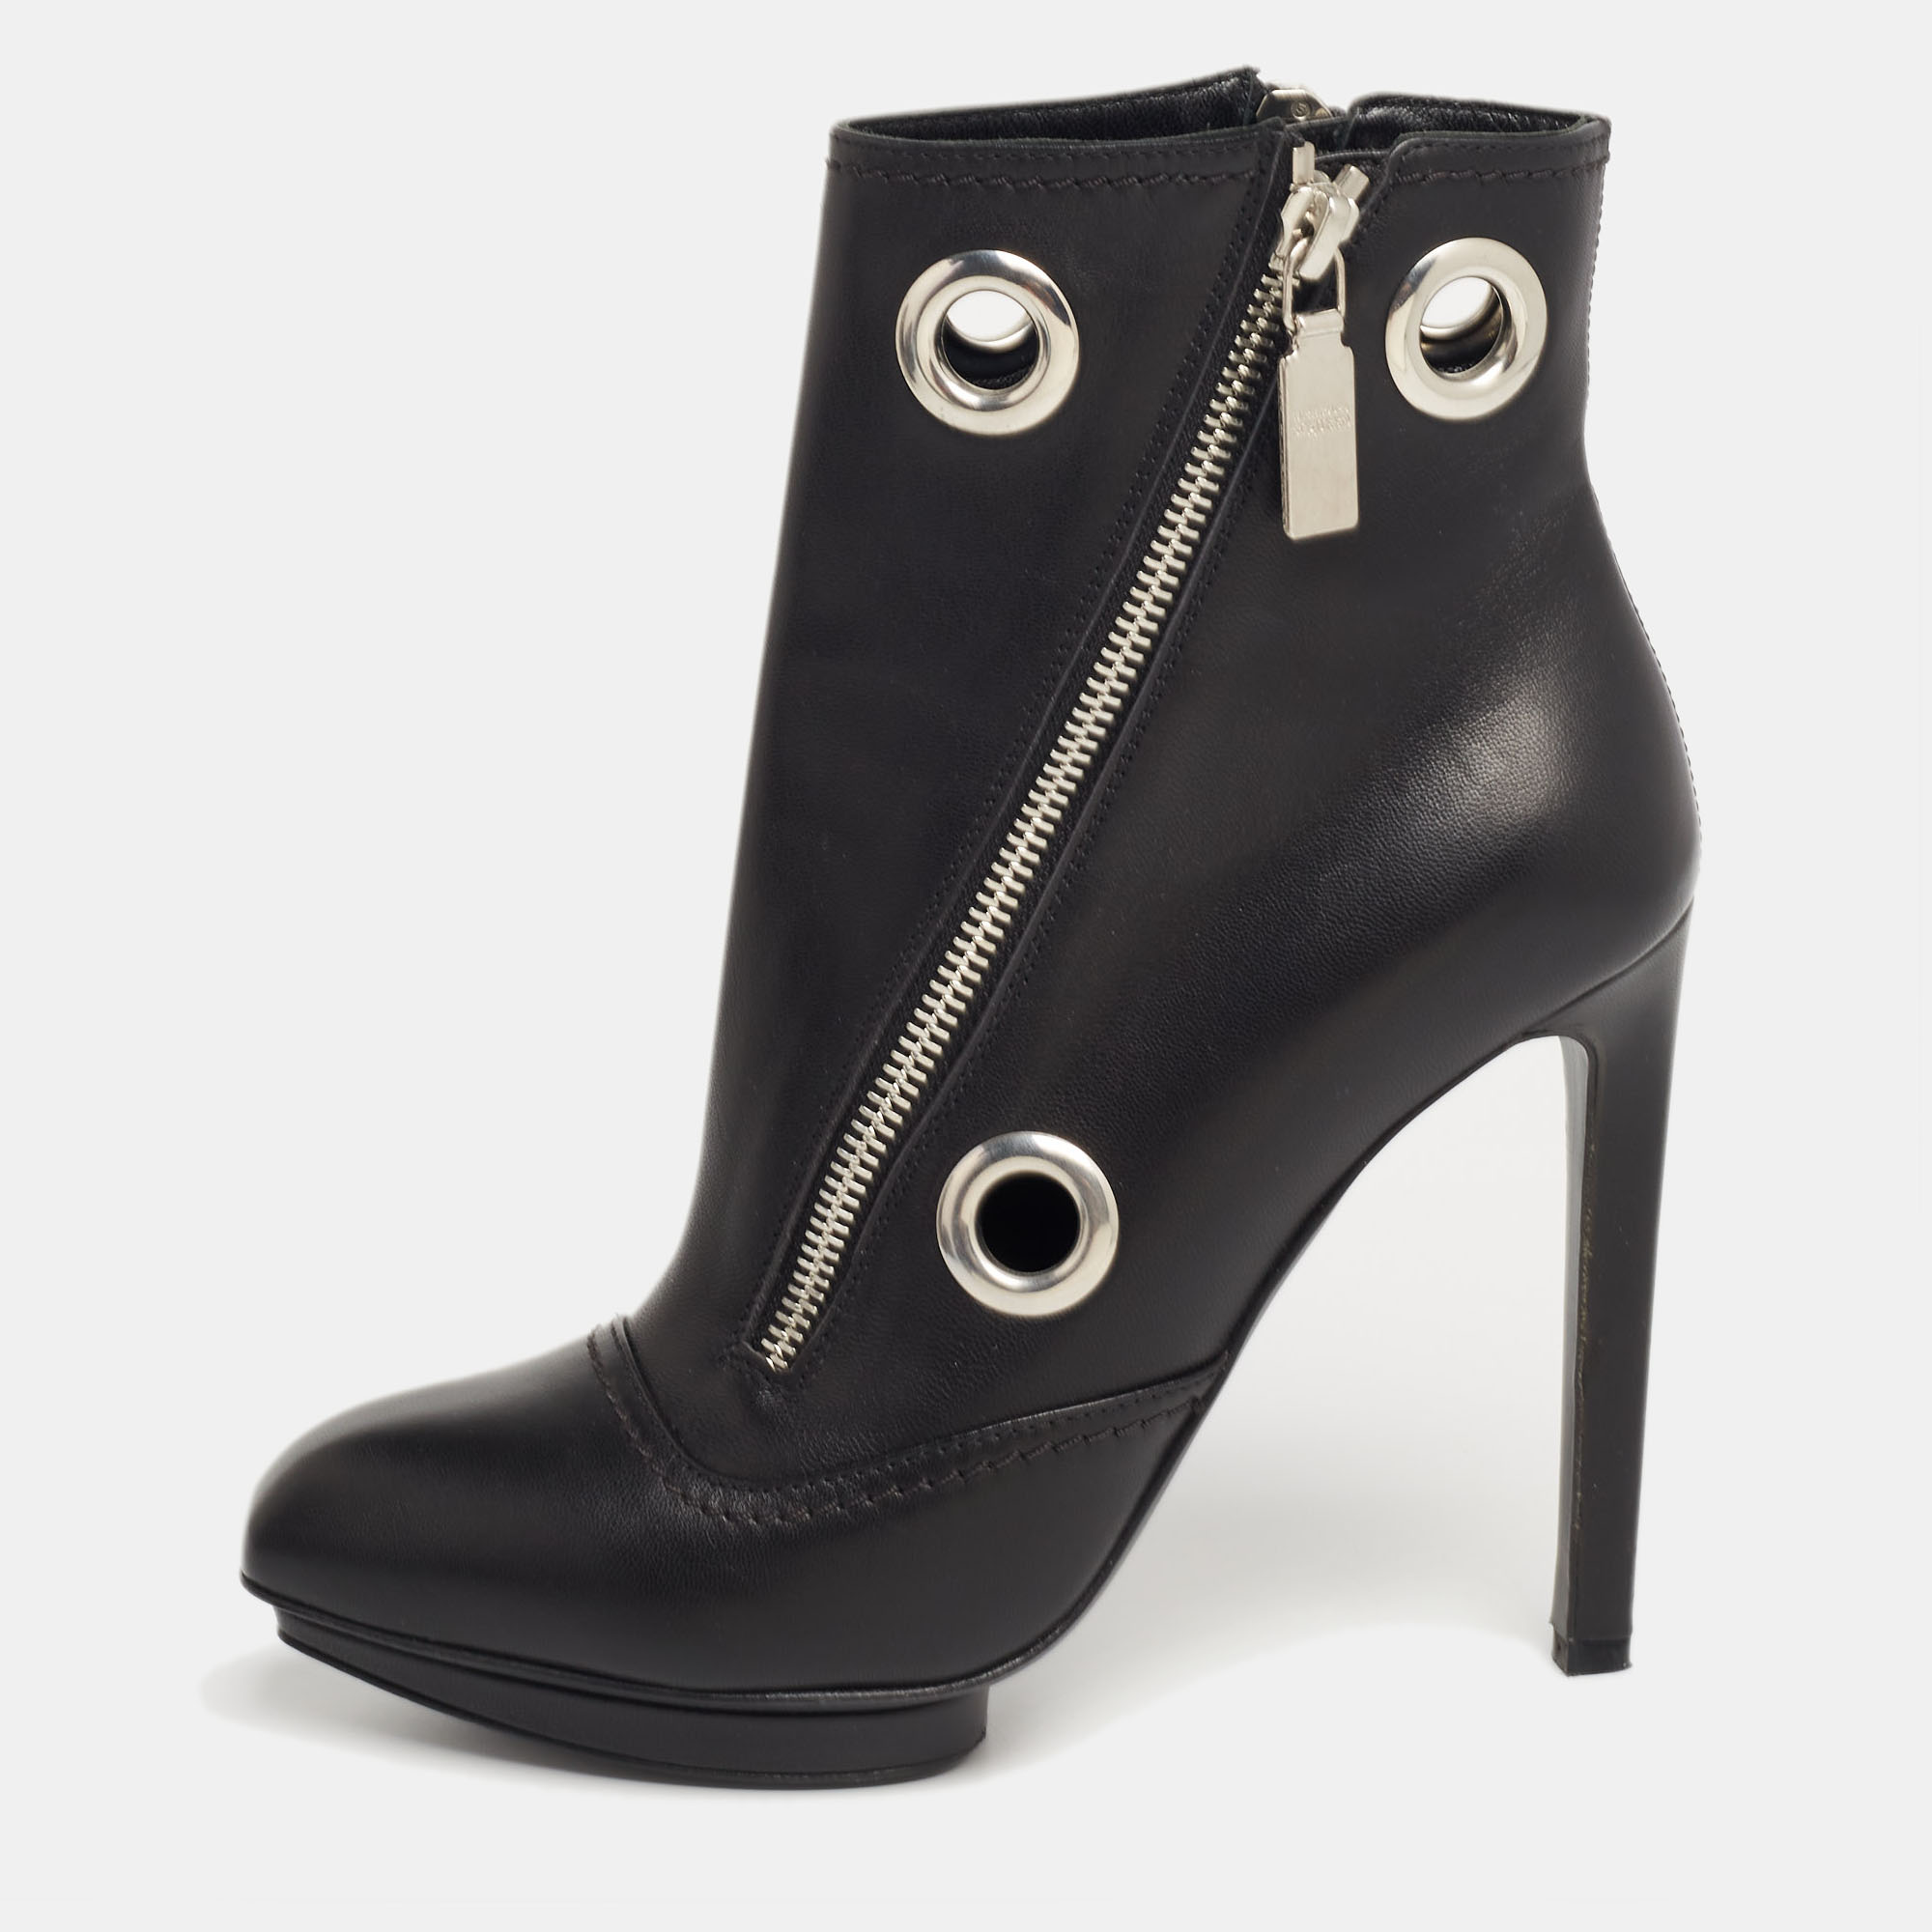 Alexander McQueen Black Leather Eyelet Detail Ankle Booties Size 37